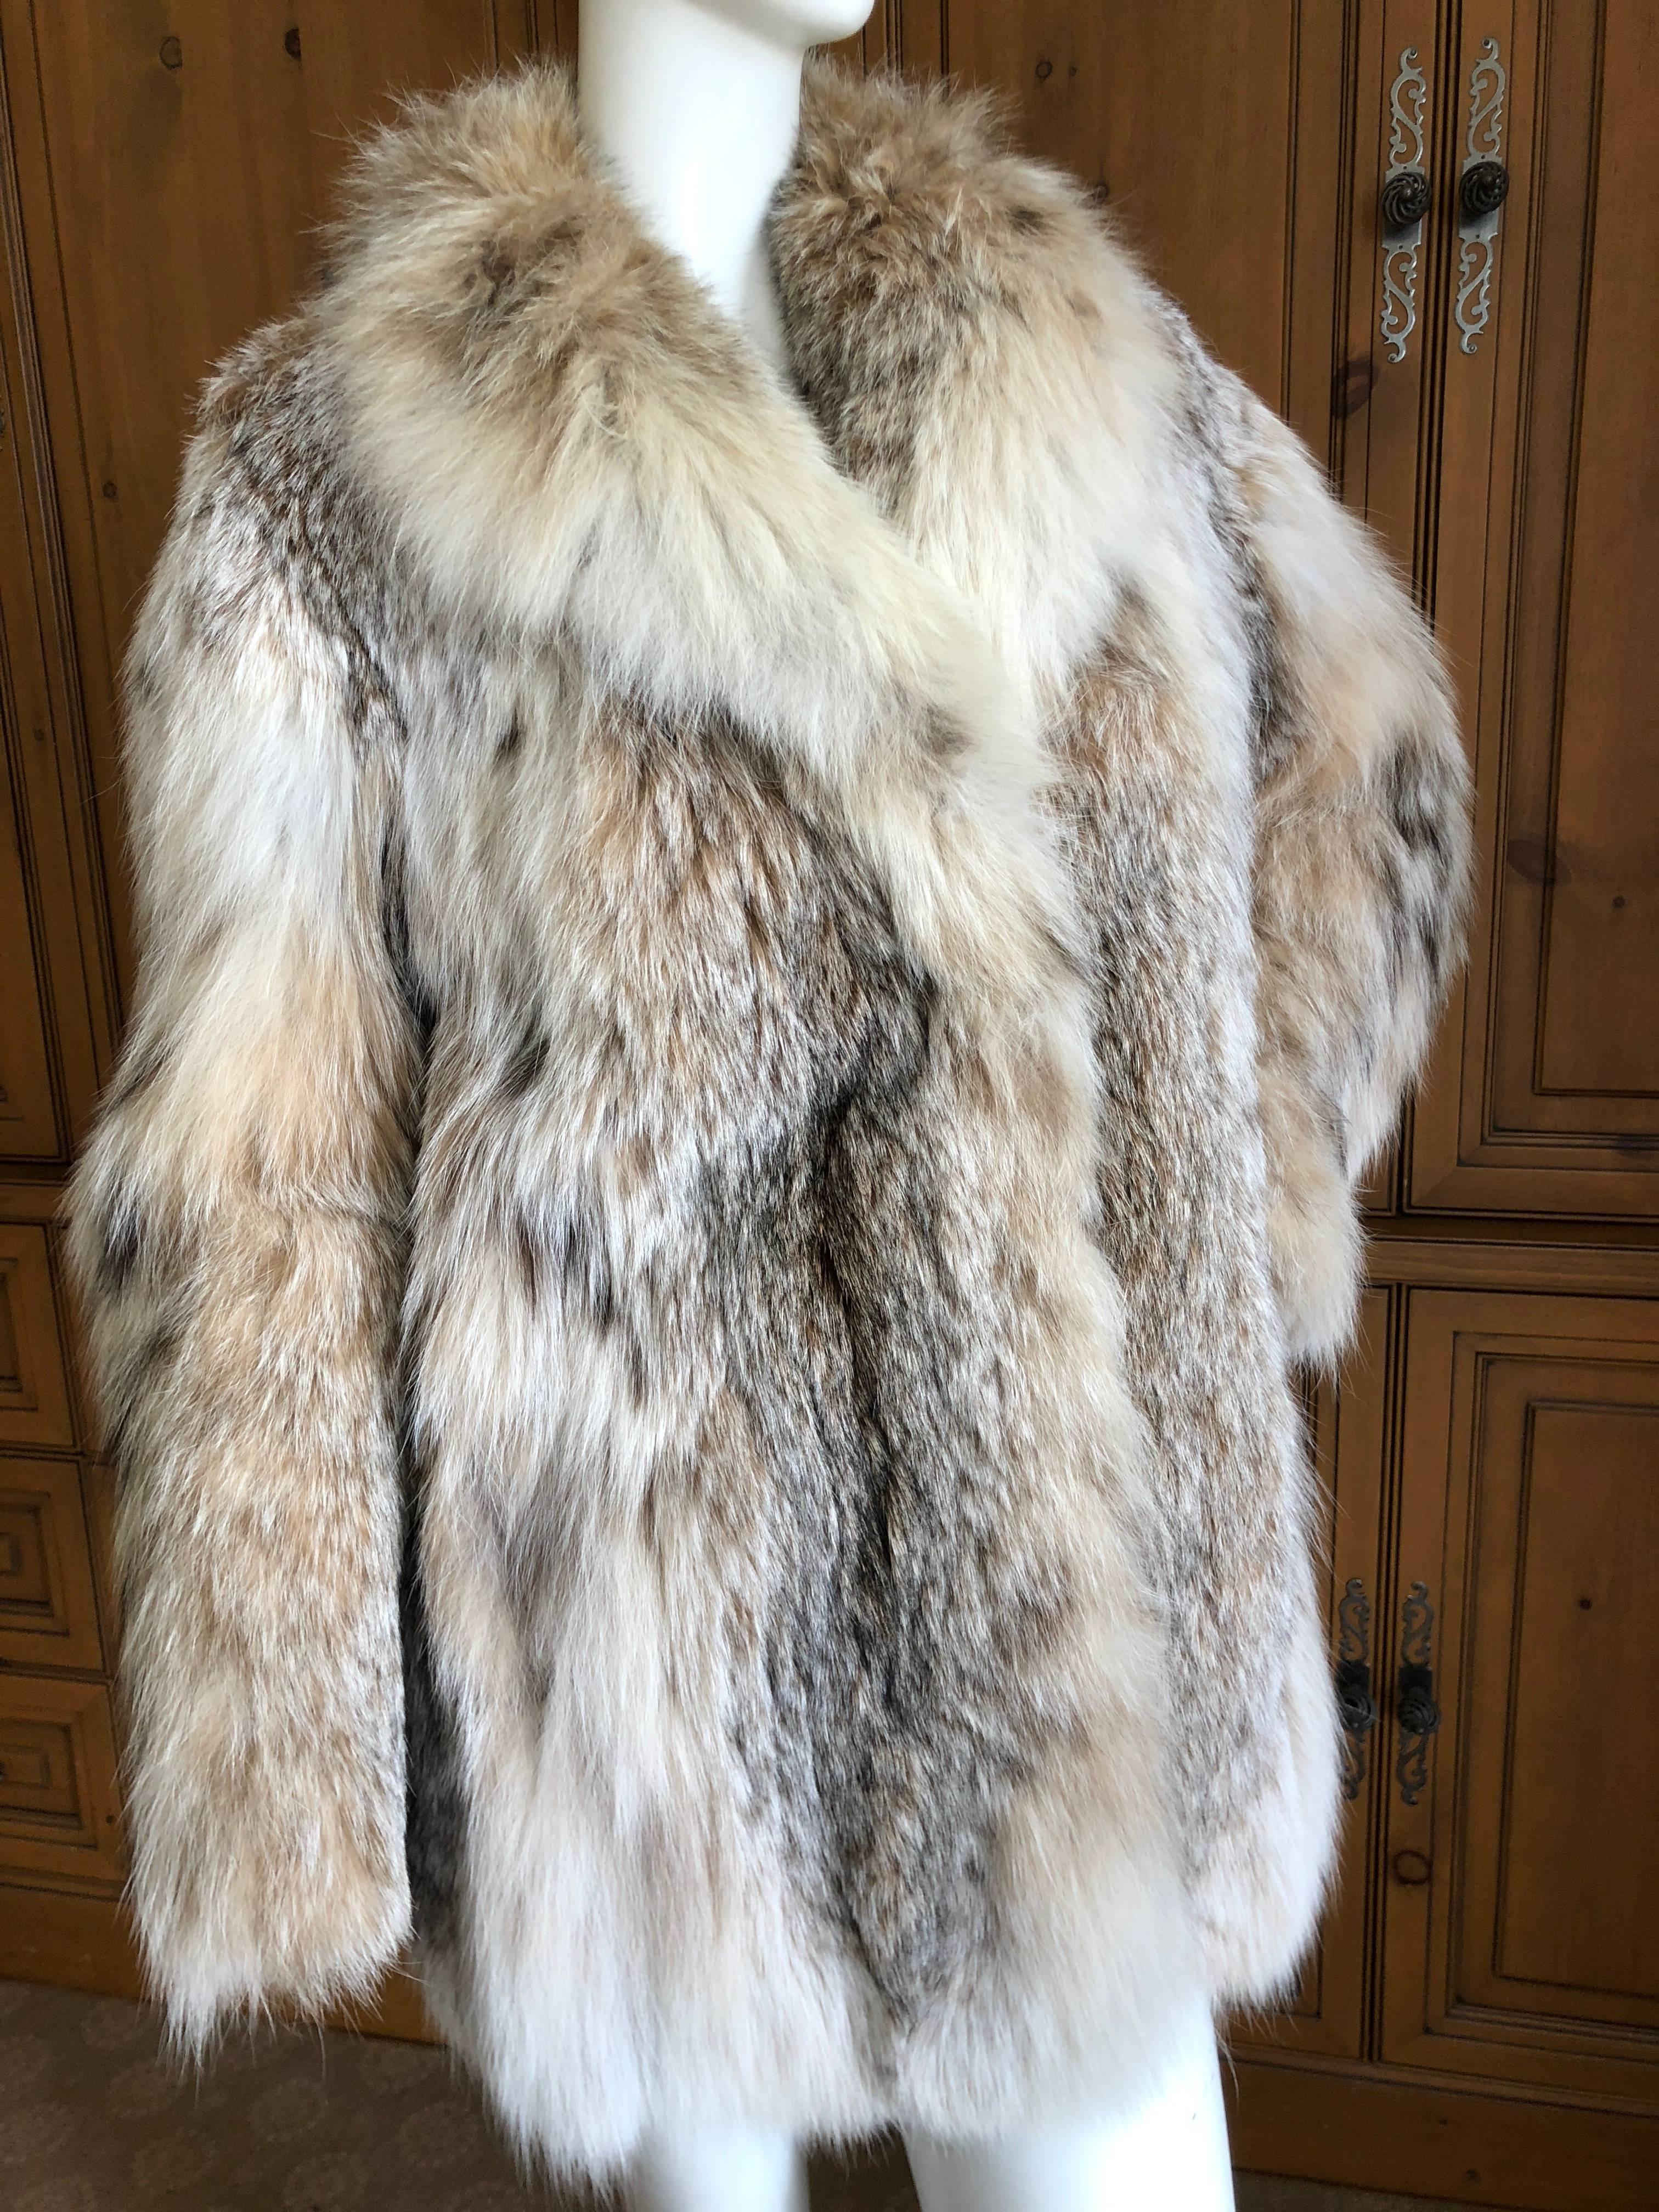  Wonderful vintage lynx fur jacket . 
Lined in silk , two side pockets, monogram in lining.
The label reads David's
 Size 40
Bust 42